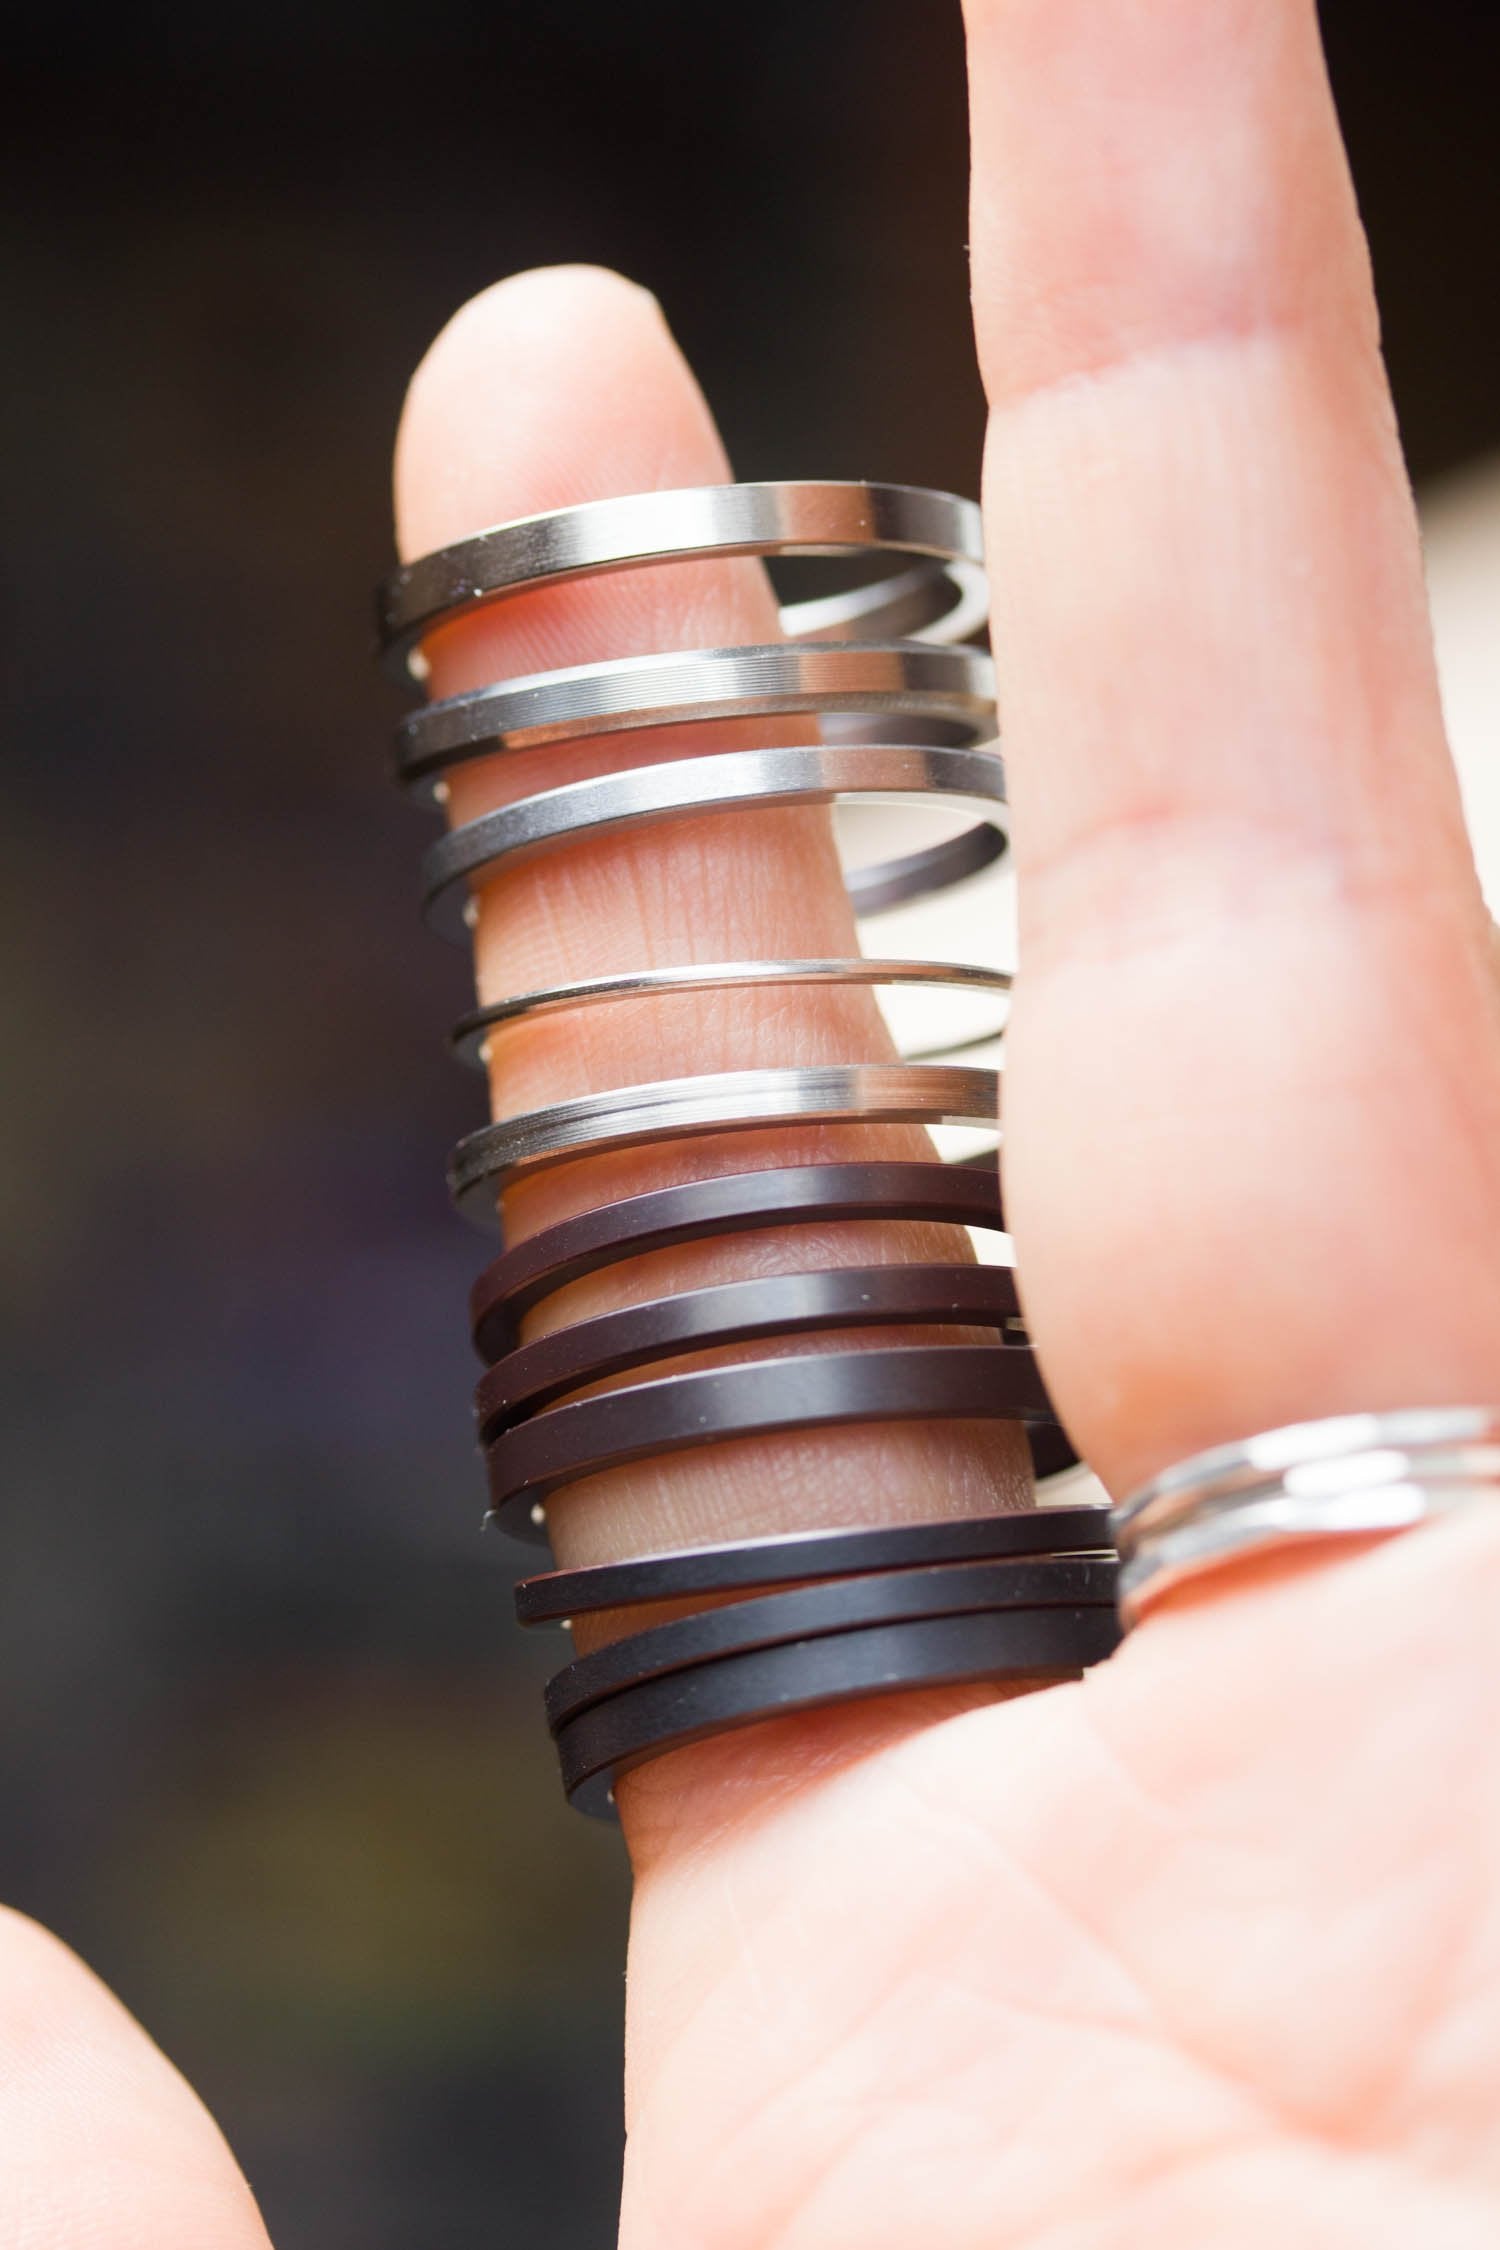 Unique Ring made of recycled HDD motor parts - unisex, men's ring